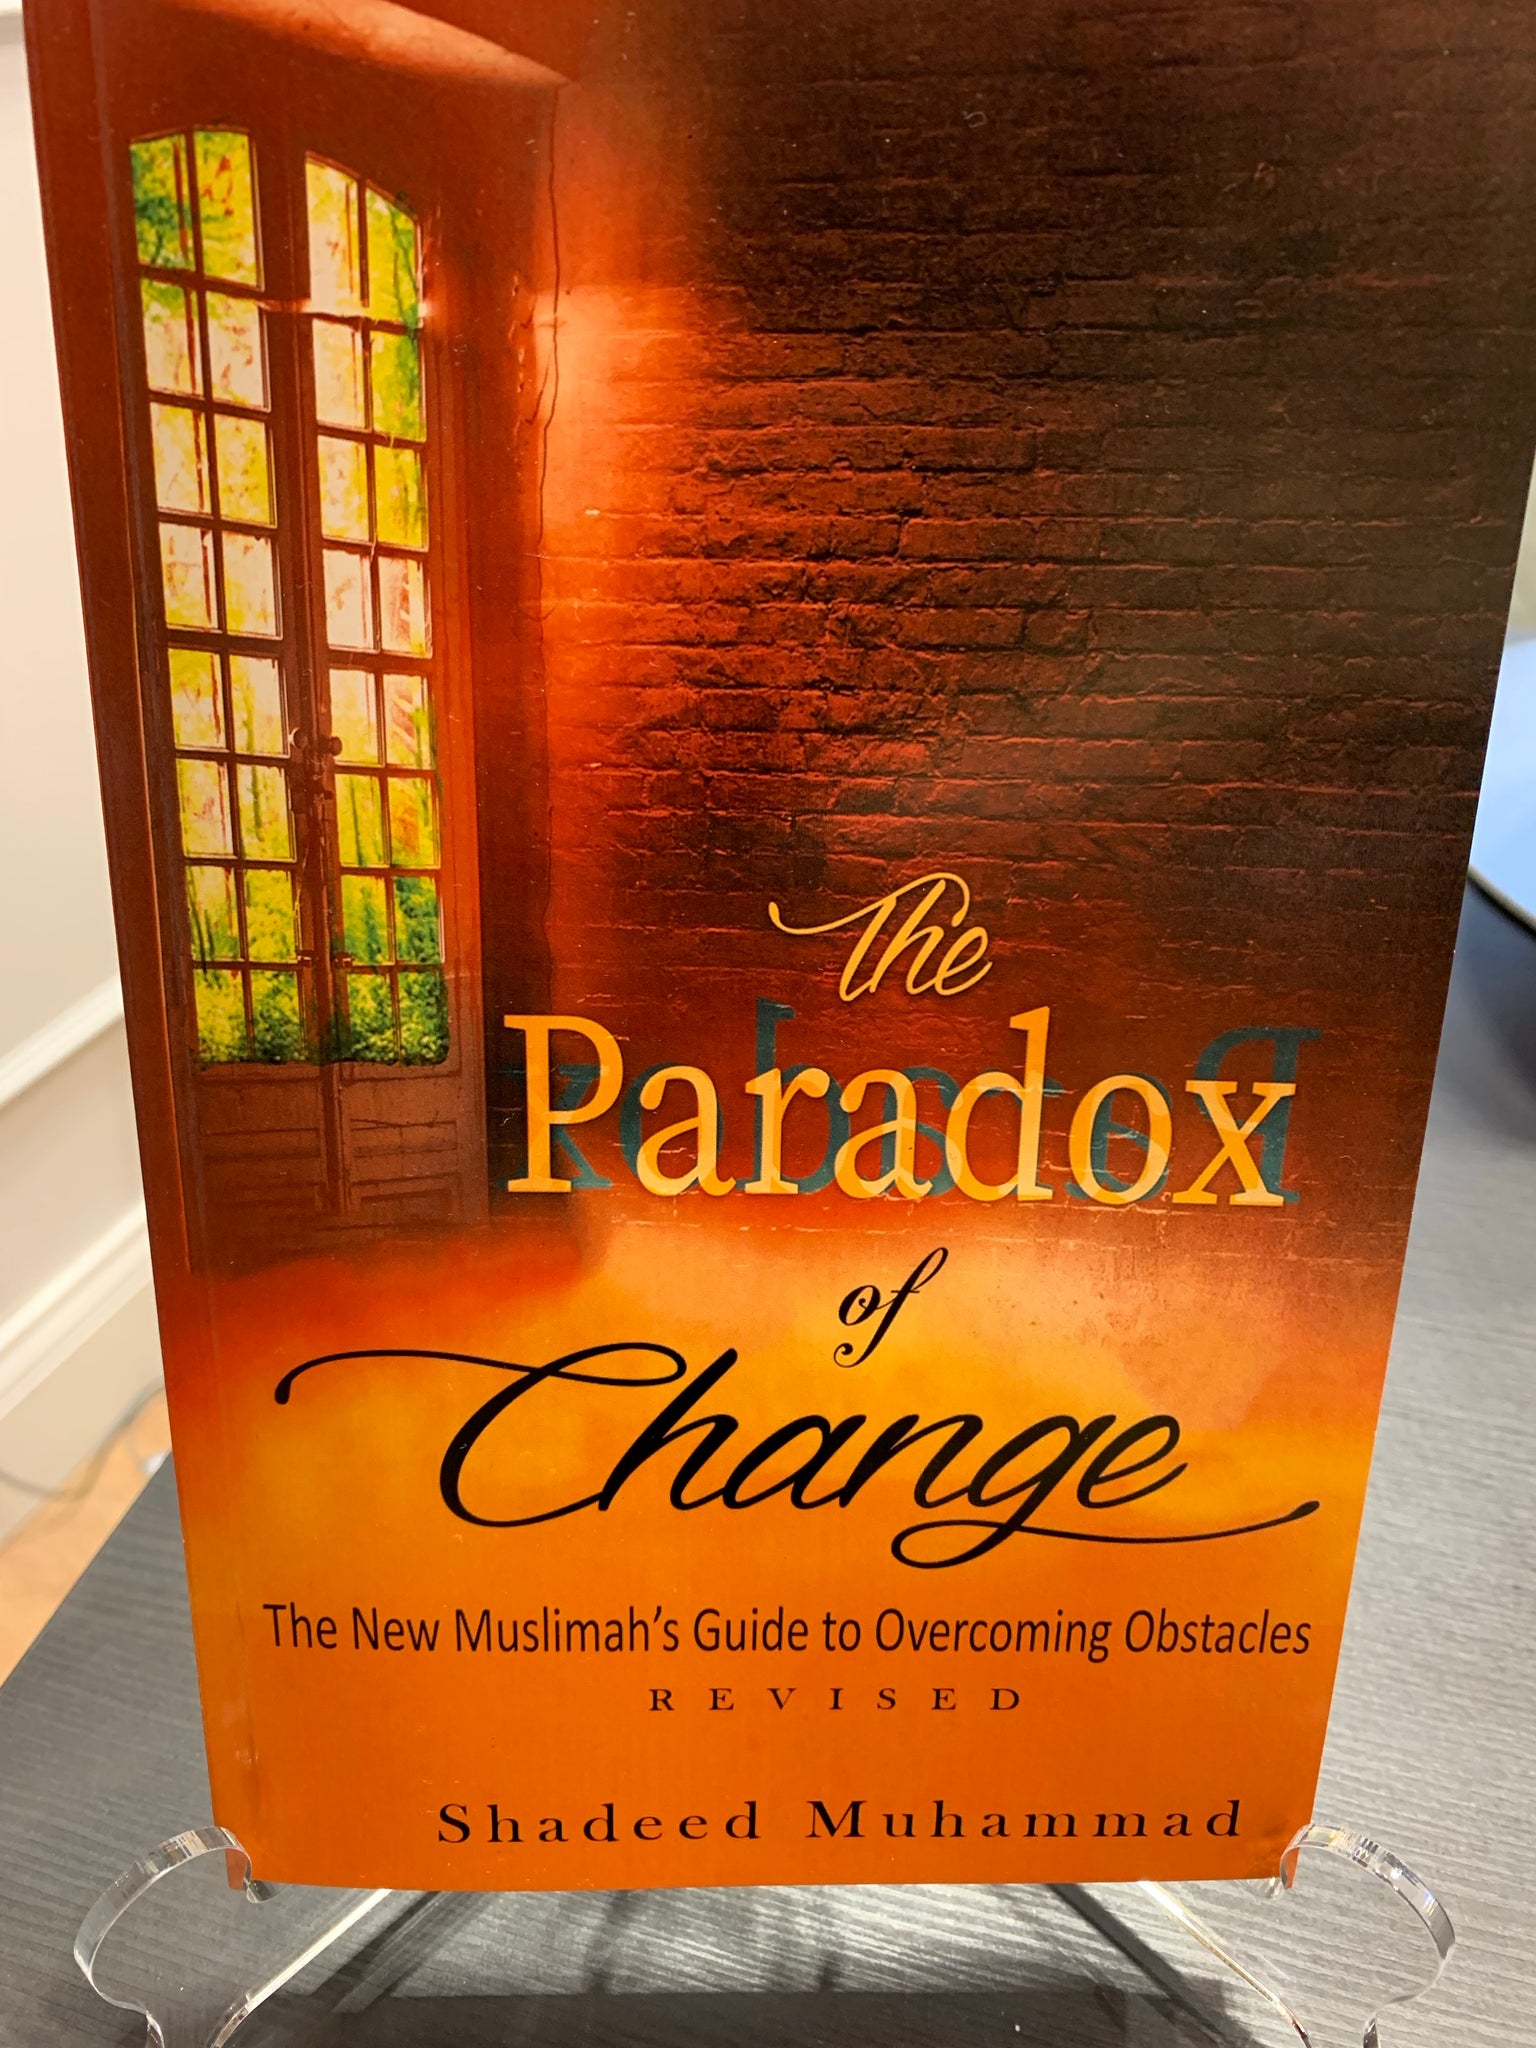 The Paradox of Change